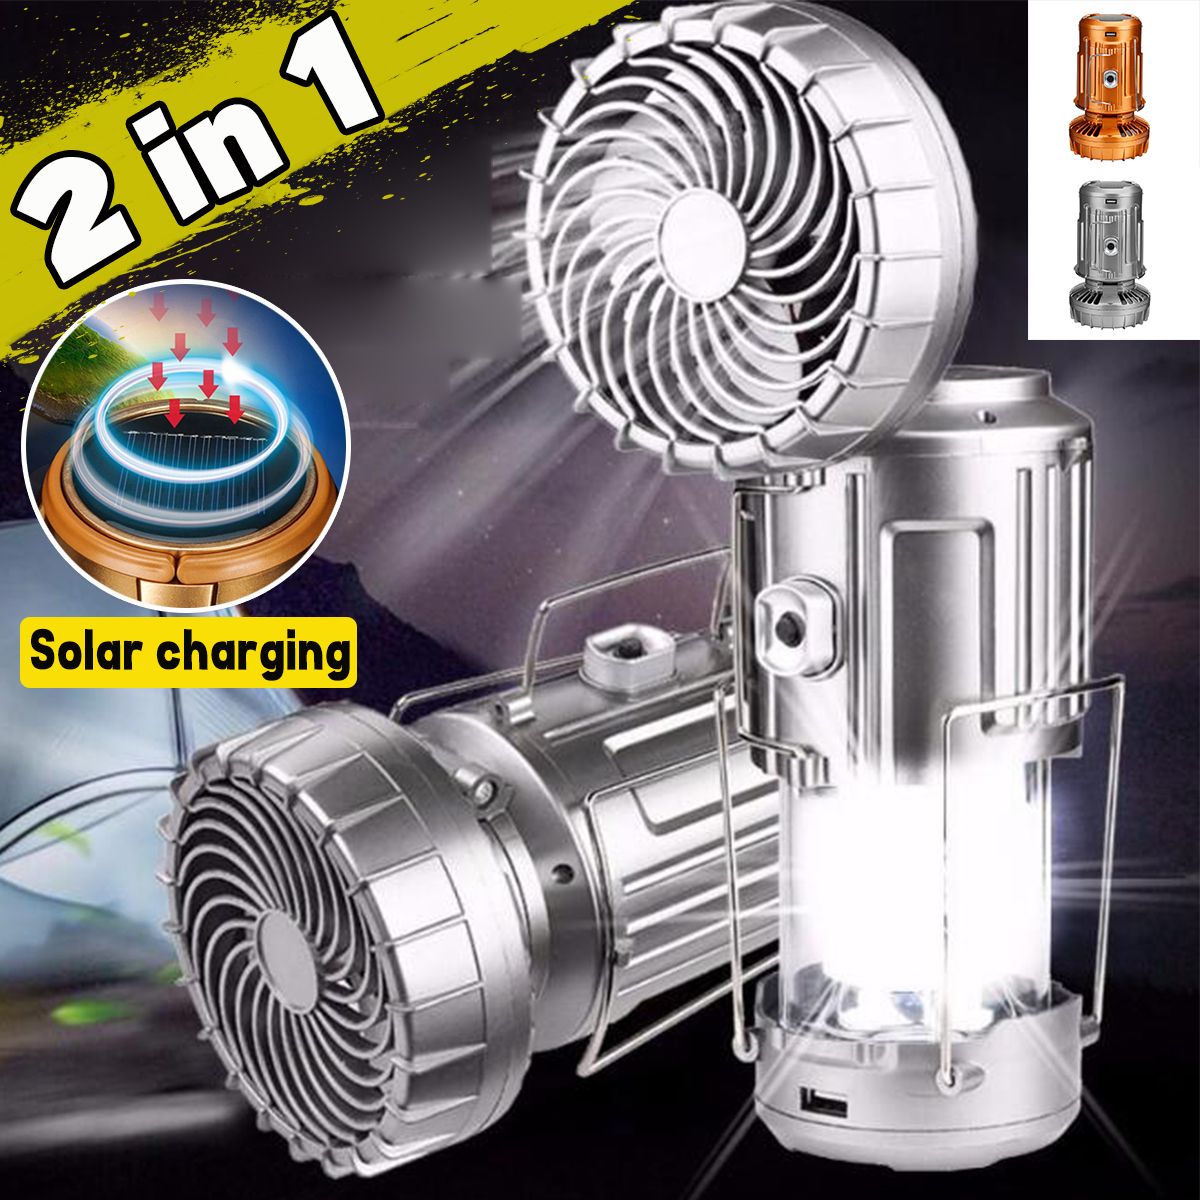 Solar-Outdoor-Fan-Rechargeable-Camping-Lantern-Light-LED-Hand-Lamp-Flashlight-1763838